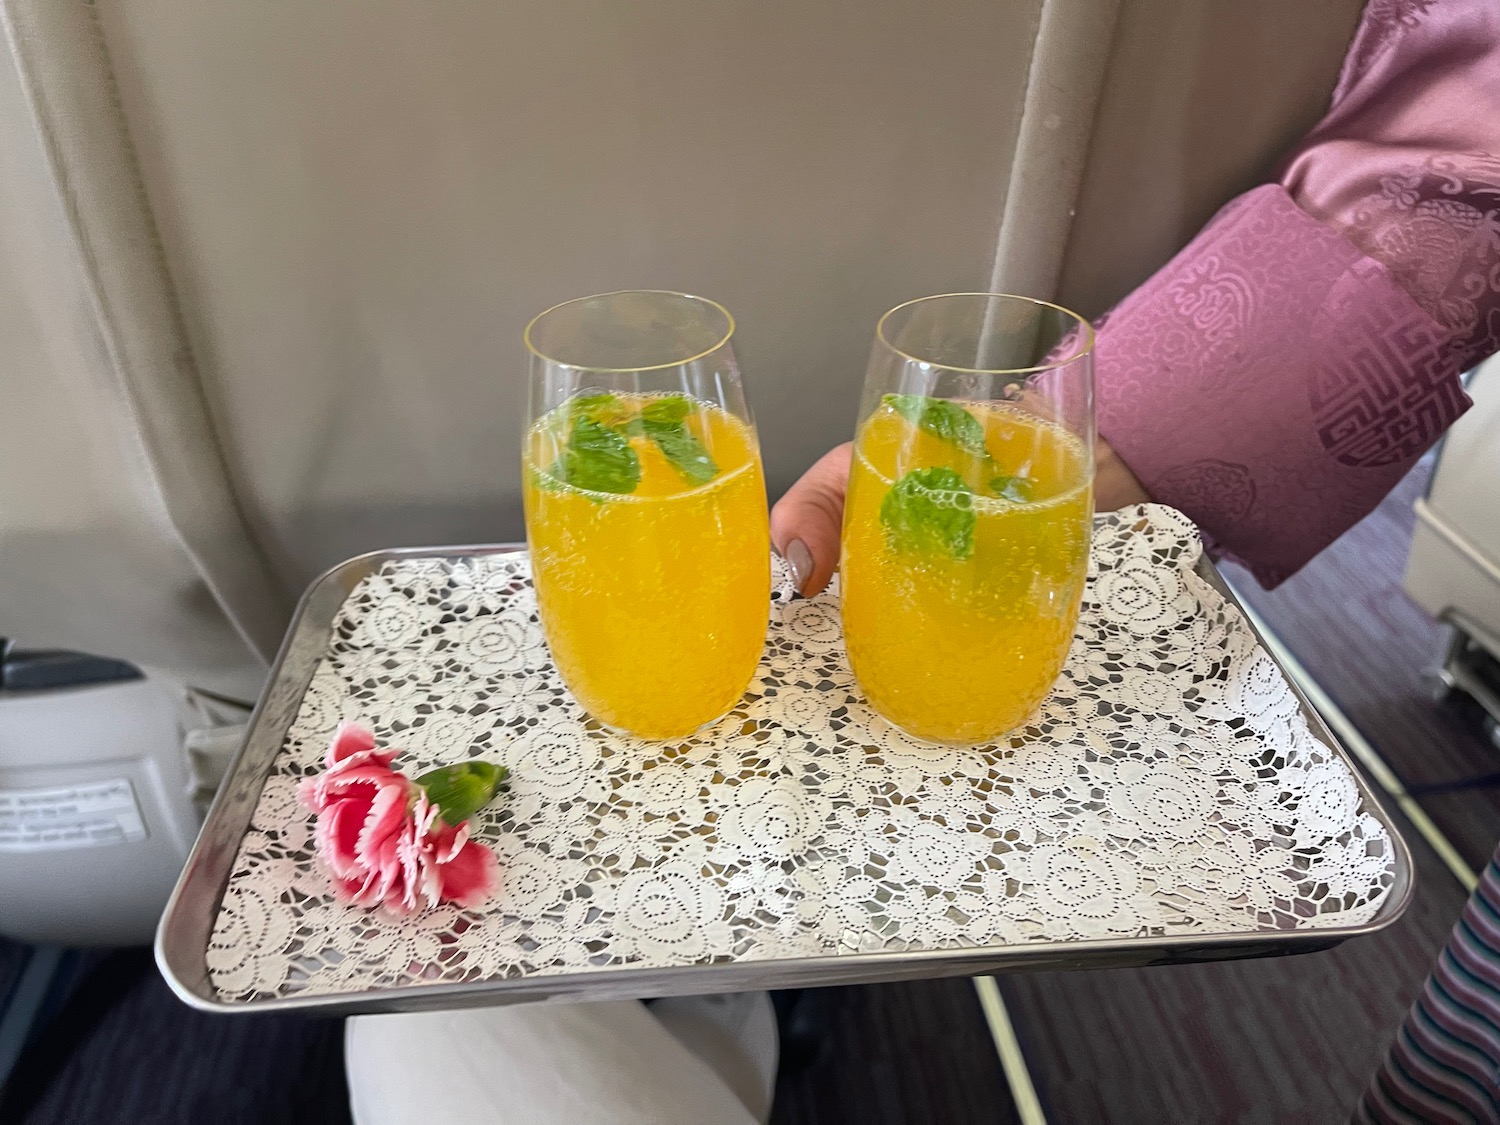 a tray with two glasses of yellow liquid and mint leaves on it